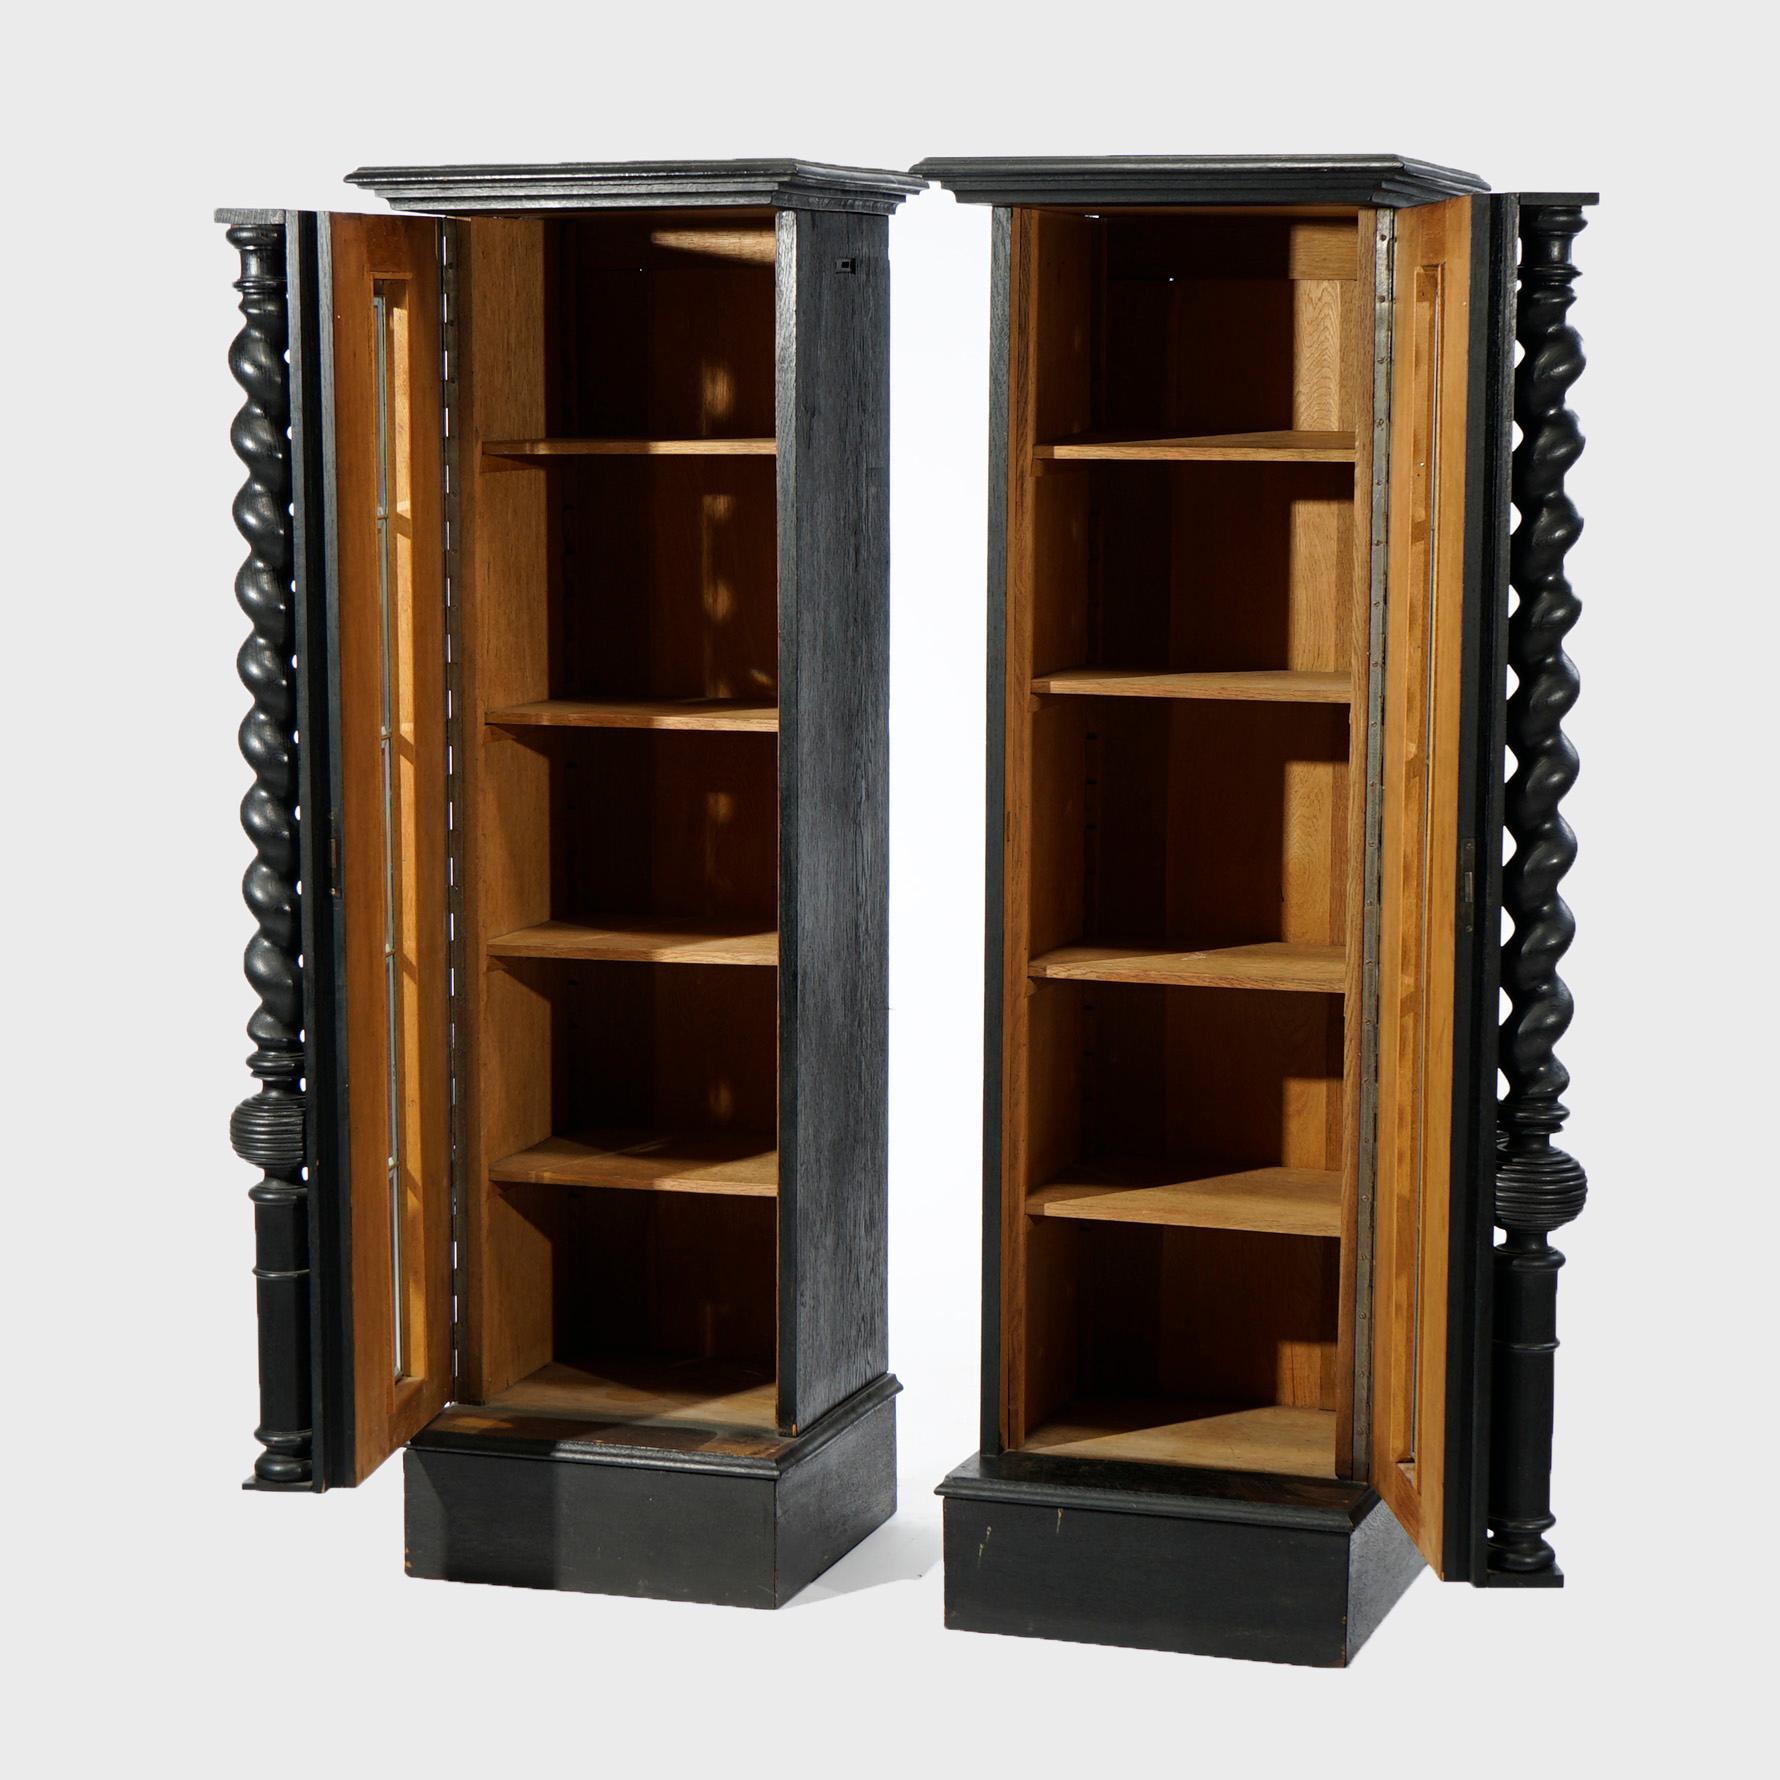 An antique pair of Elizabethan style bookcase cabinets offer ebonized English oak construction in tall narrow form, each having a single door with leaded beveled glass opening to shelved interiors and with flanking barley twist columns,